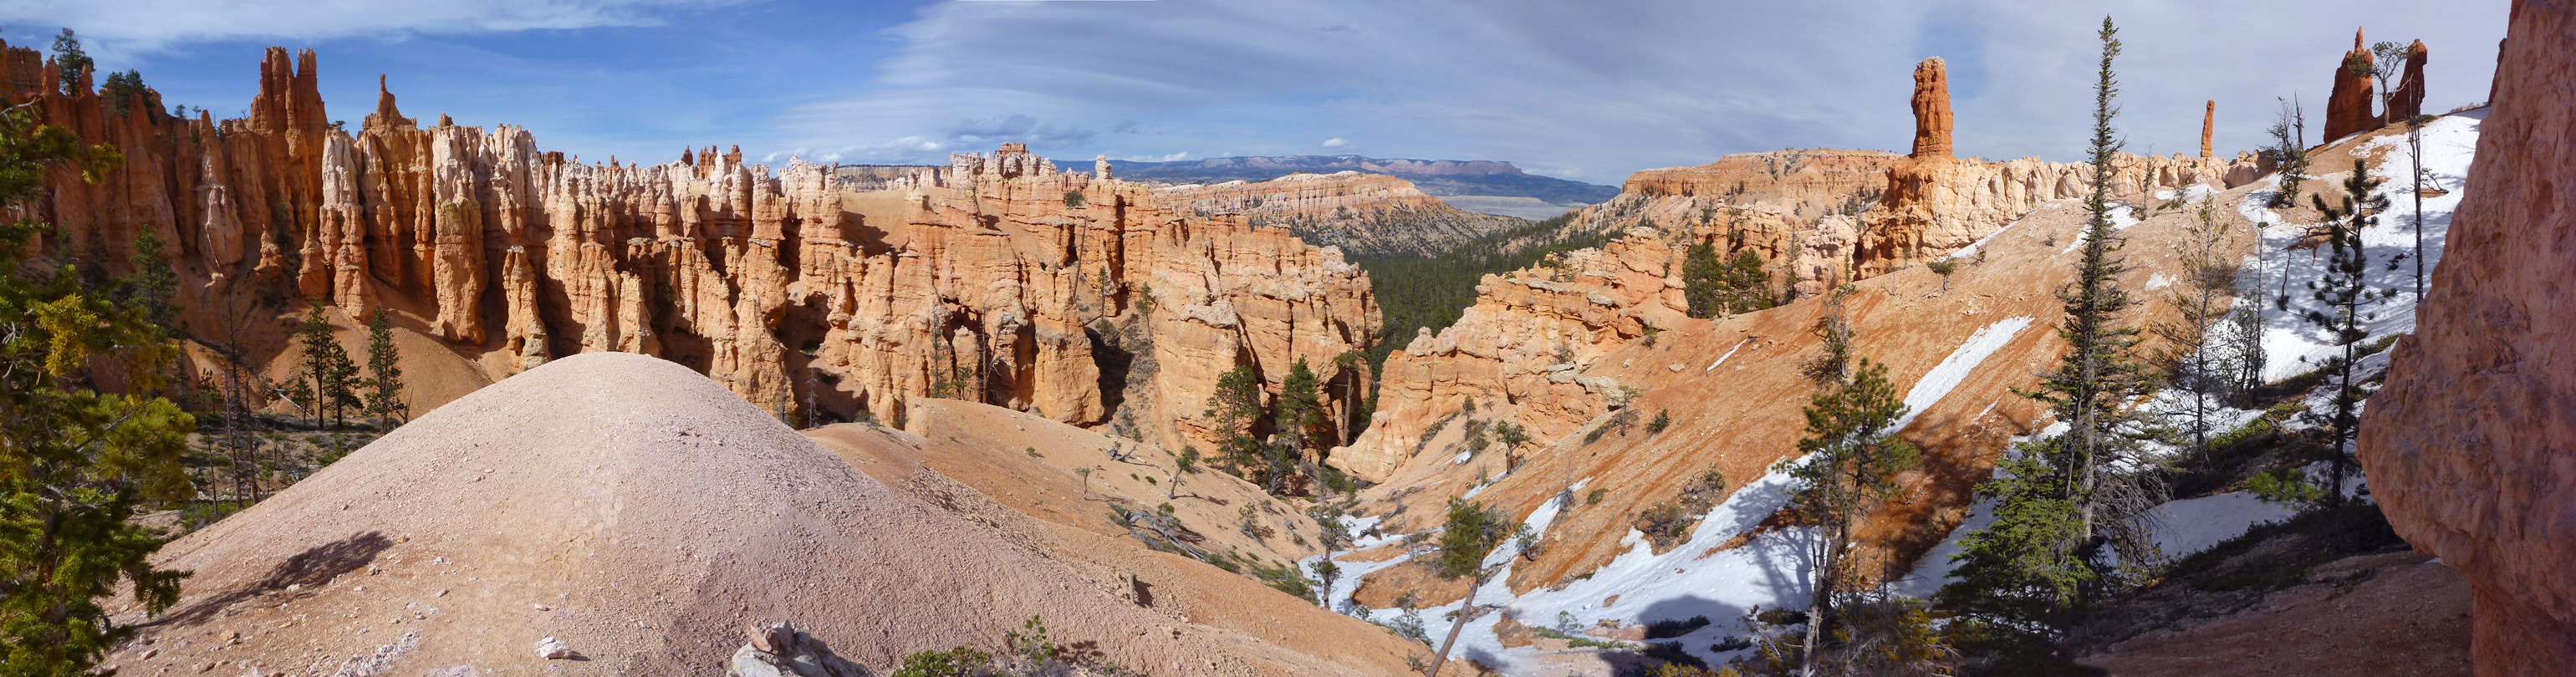 Patches of snow amongst the hoodoos